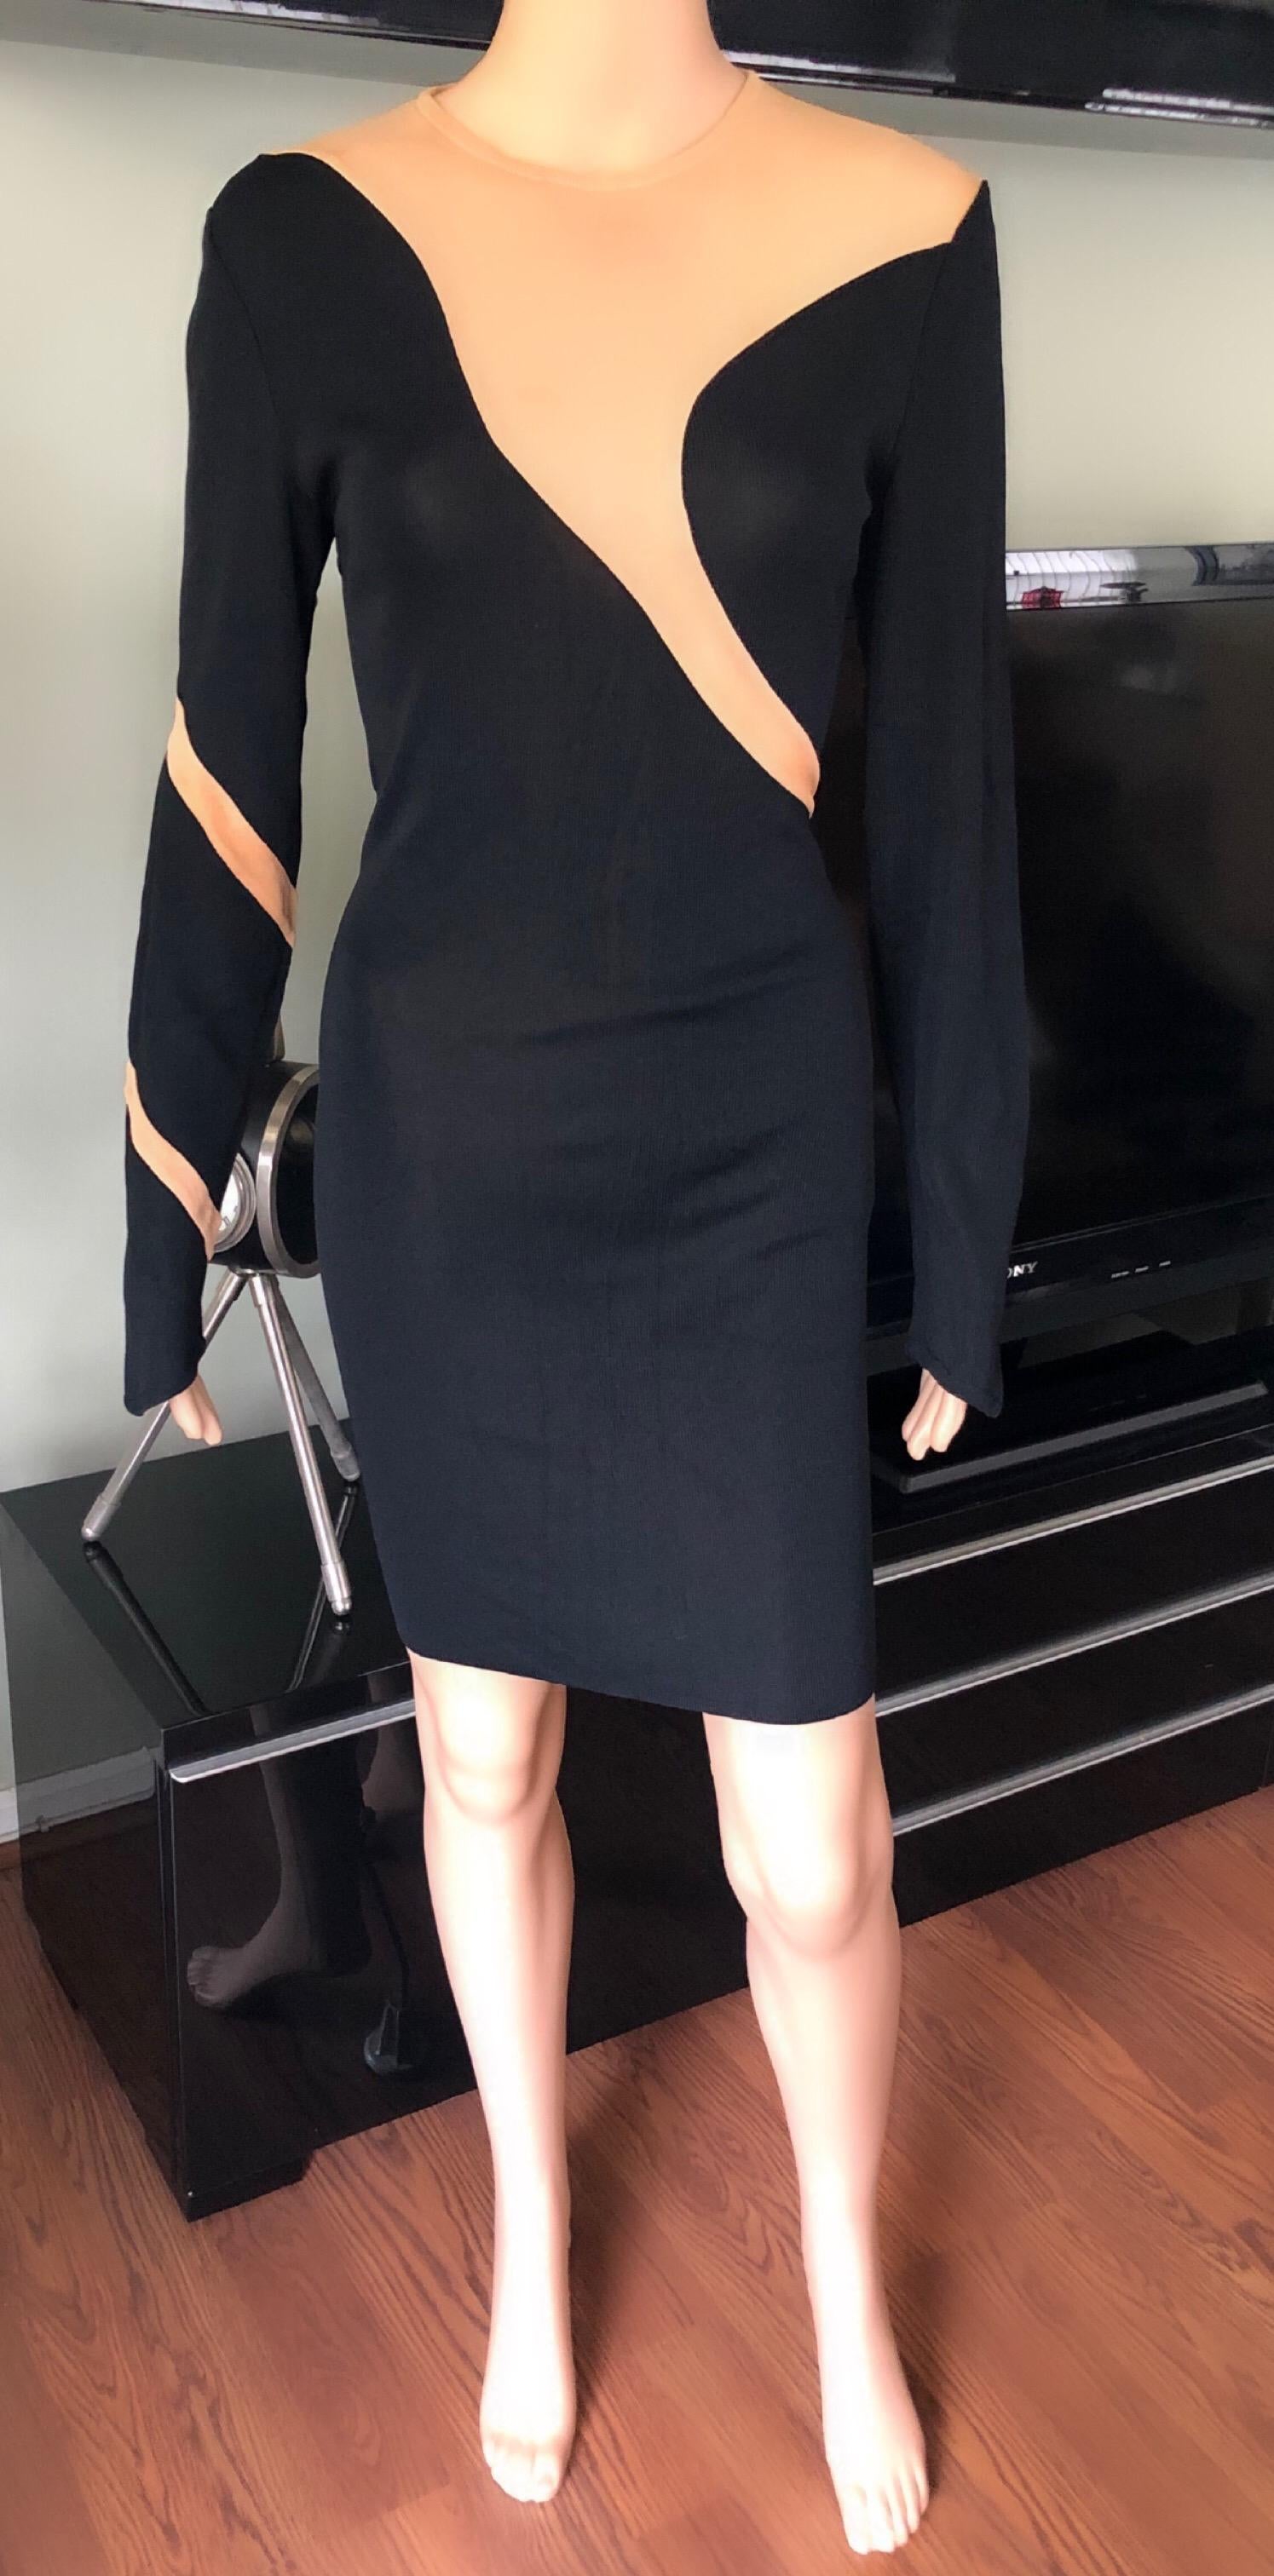 Thierry Mugler Vintage Semi-Sheer Panels Bodycon Black Dress  In Good Condition For Sale In Naples, FL